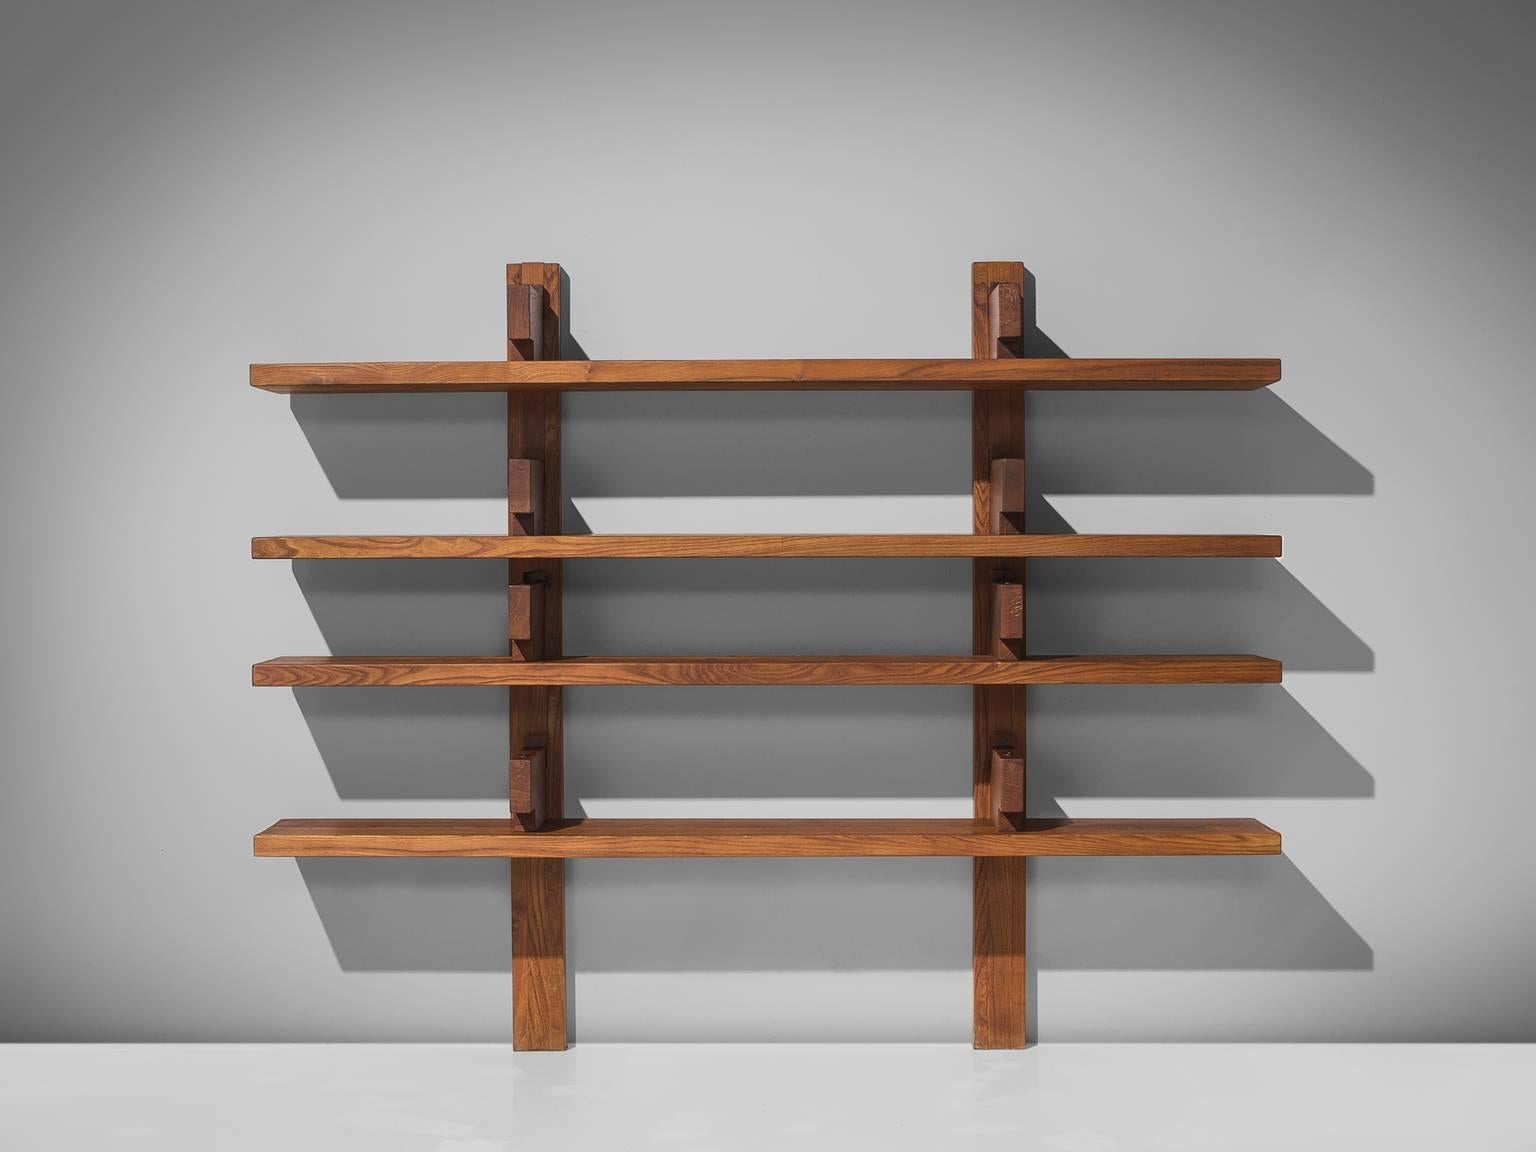 Pierre Chapo, bibliothèque, model no. B17B, elm, France, 1960s.

Model 'B17' - shelves designed by Pierre Chapo. The shelving system was created in 1967 were is was presented at the Salon des Arts Ménagers. This robust and solid bookcase consist